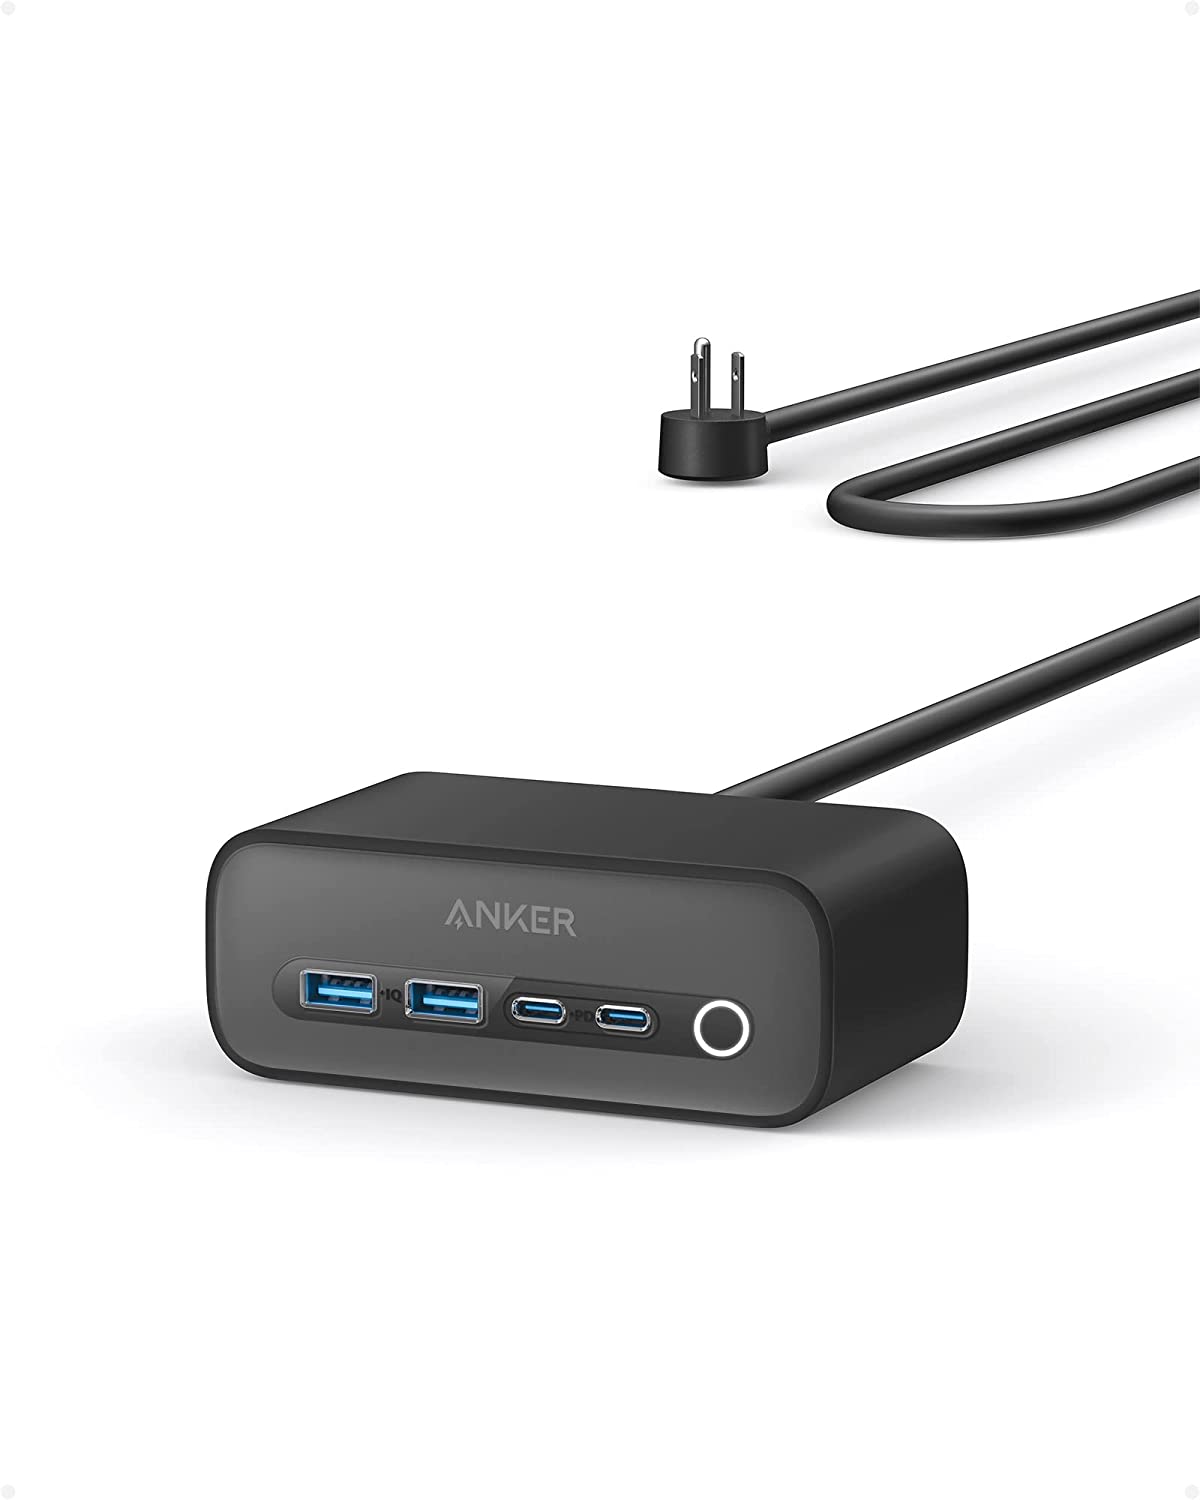 Anker 525 Charging Station Spotted Dropping to Less than $50 After 20% Discount